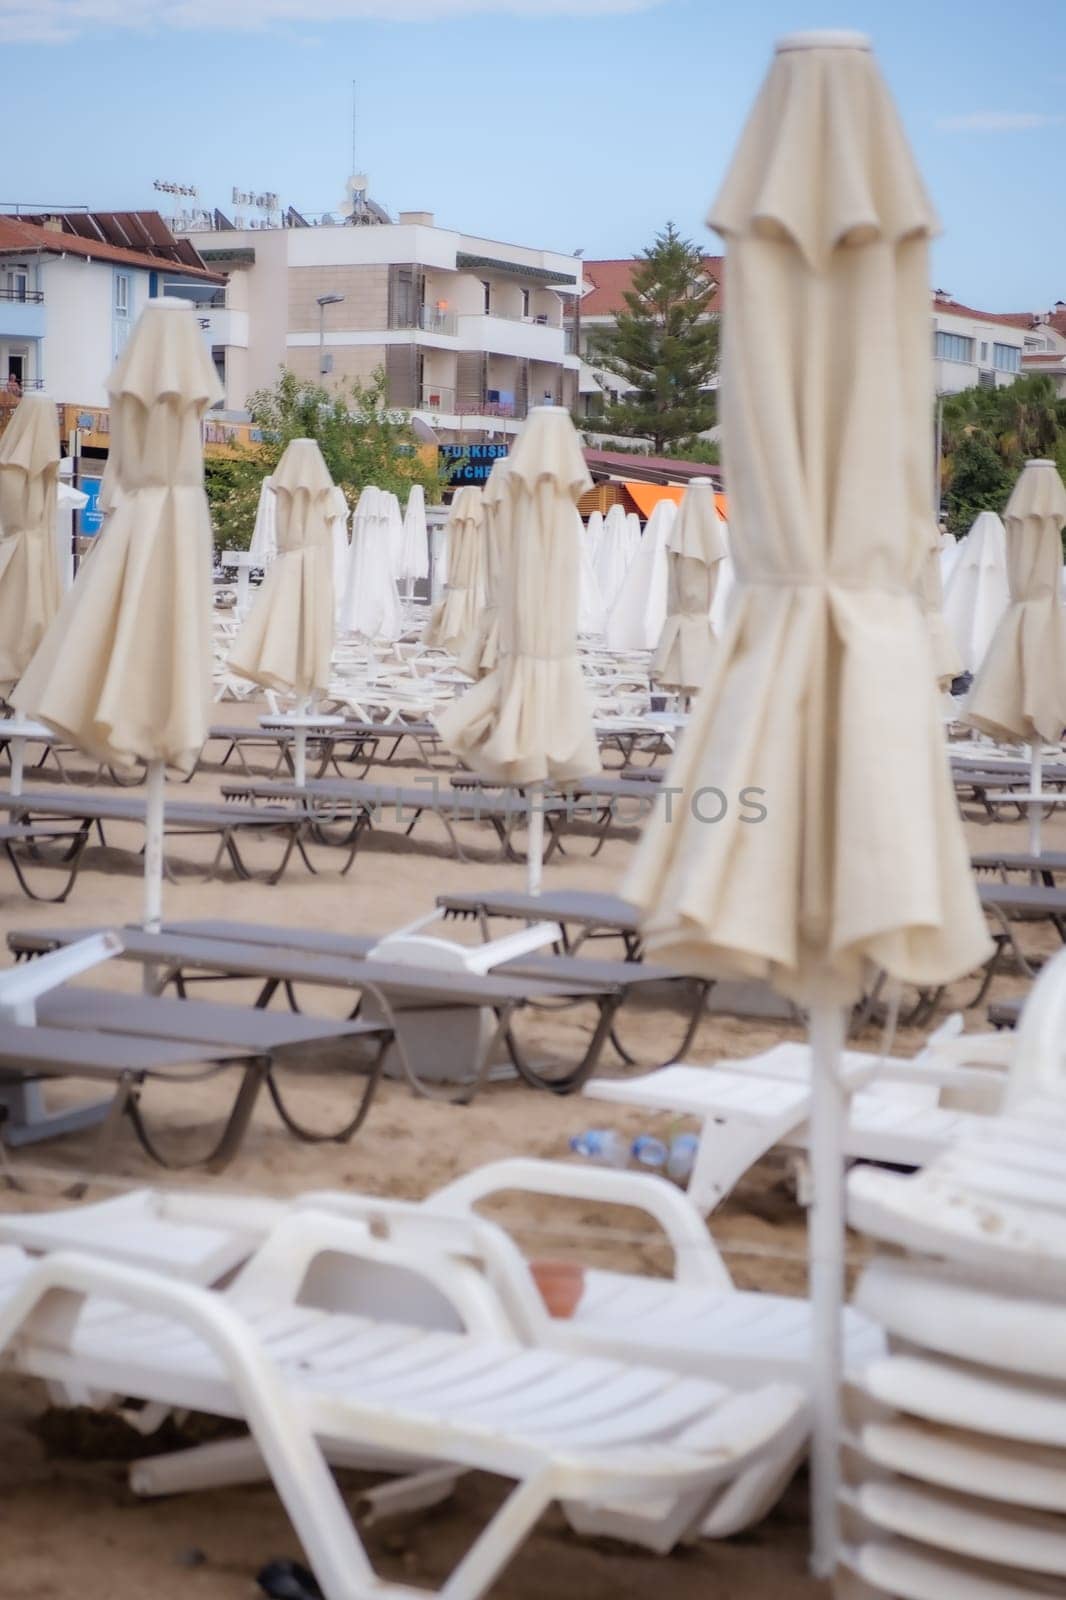 Umbrellas and sun loungers in the assembled state on the beach. by AnatoliiFoto